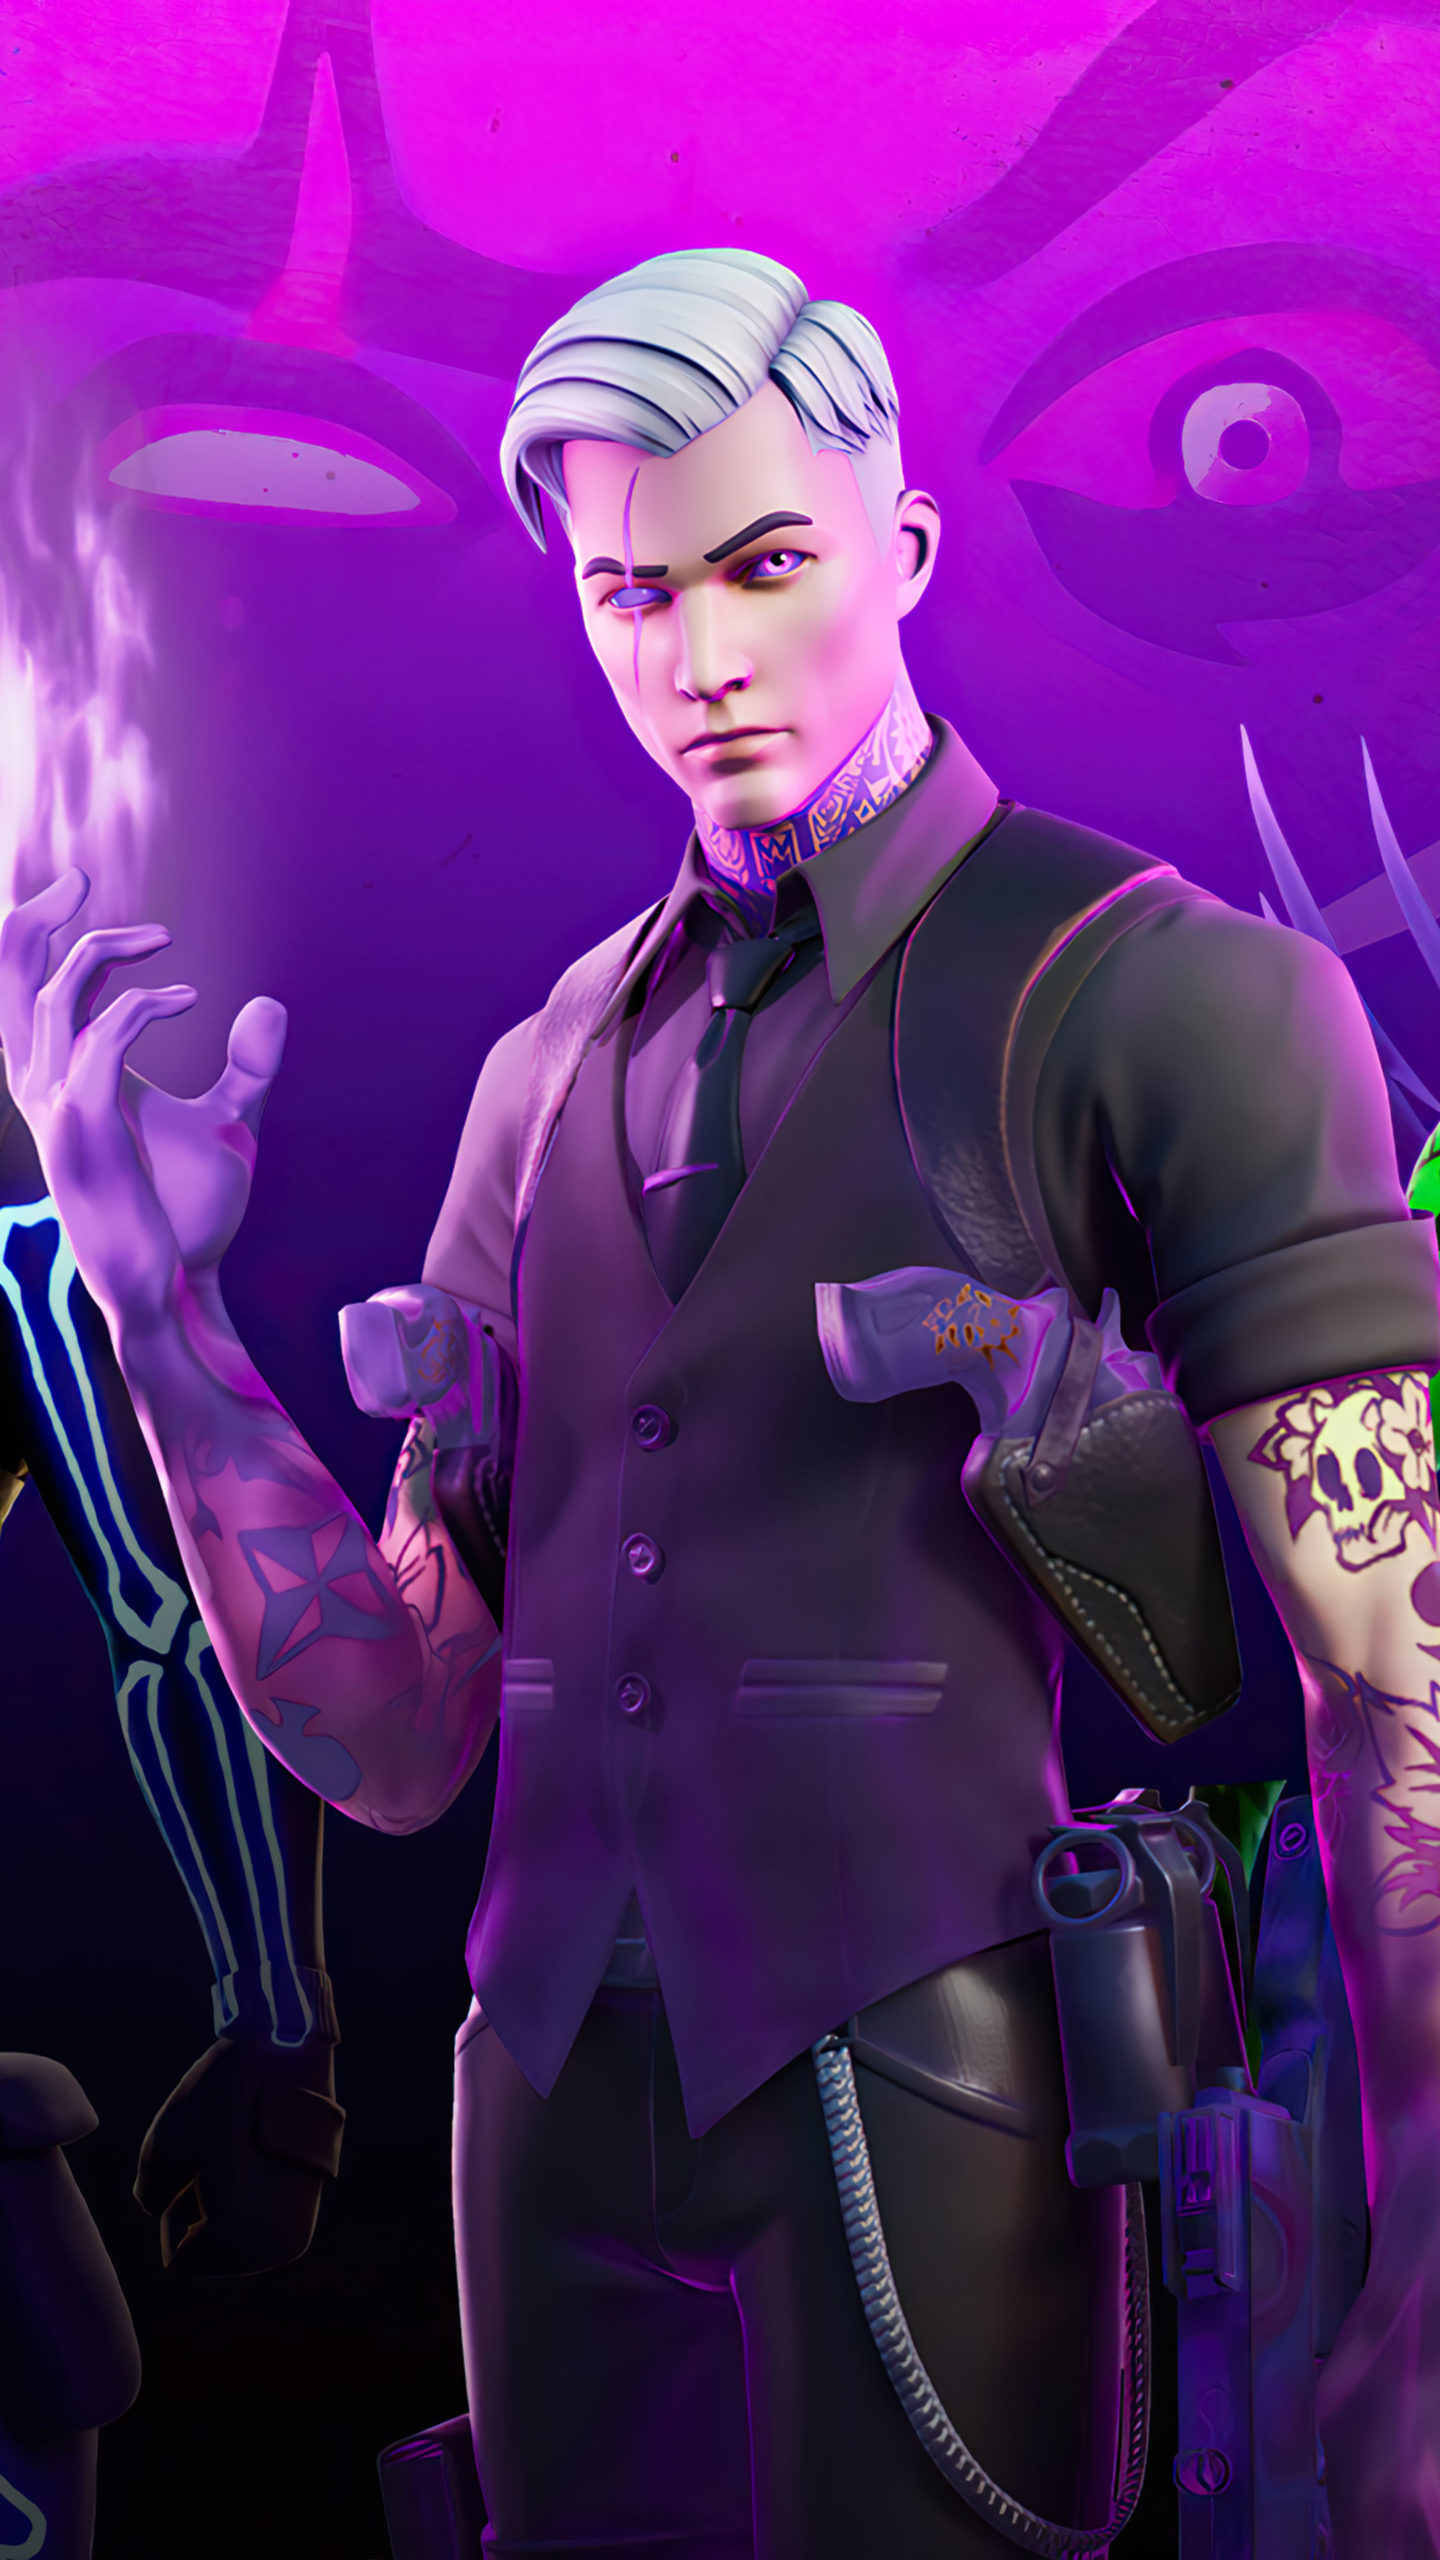 Download wallpapers Off Shadow Midas 4k violet neon lights Fortnite  Battle Royale Fortnite characters Off Shadow Midas Skin Fortnite Off  Shadow Midas Fortnite for desktop with resolution 3840x2400 High Quality  HD pictures